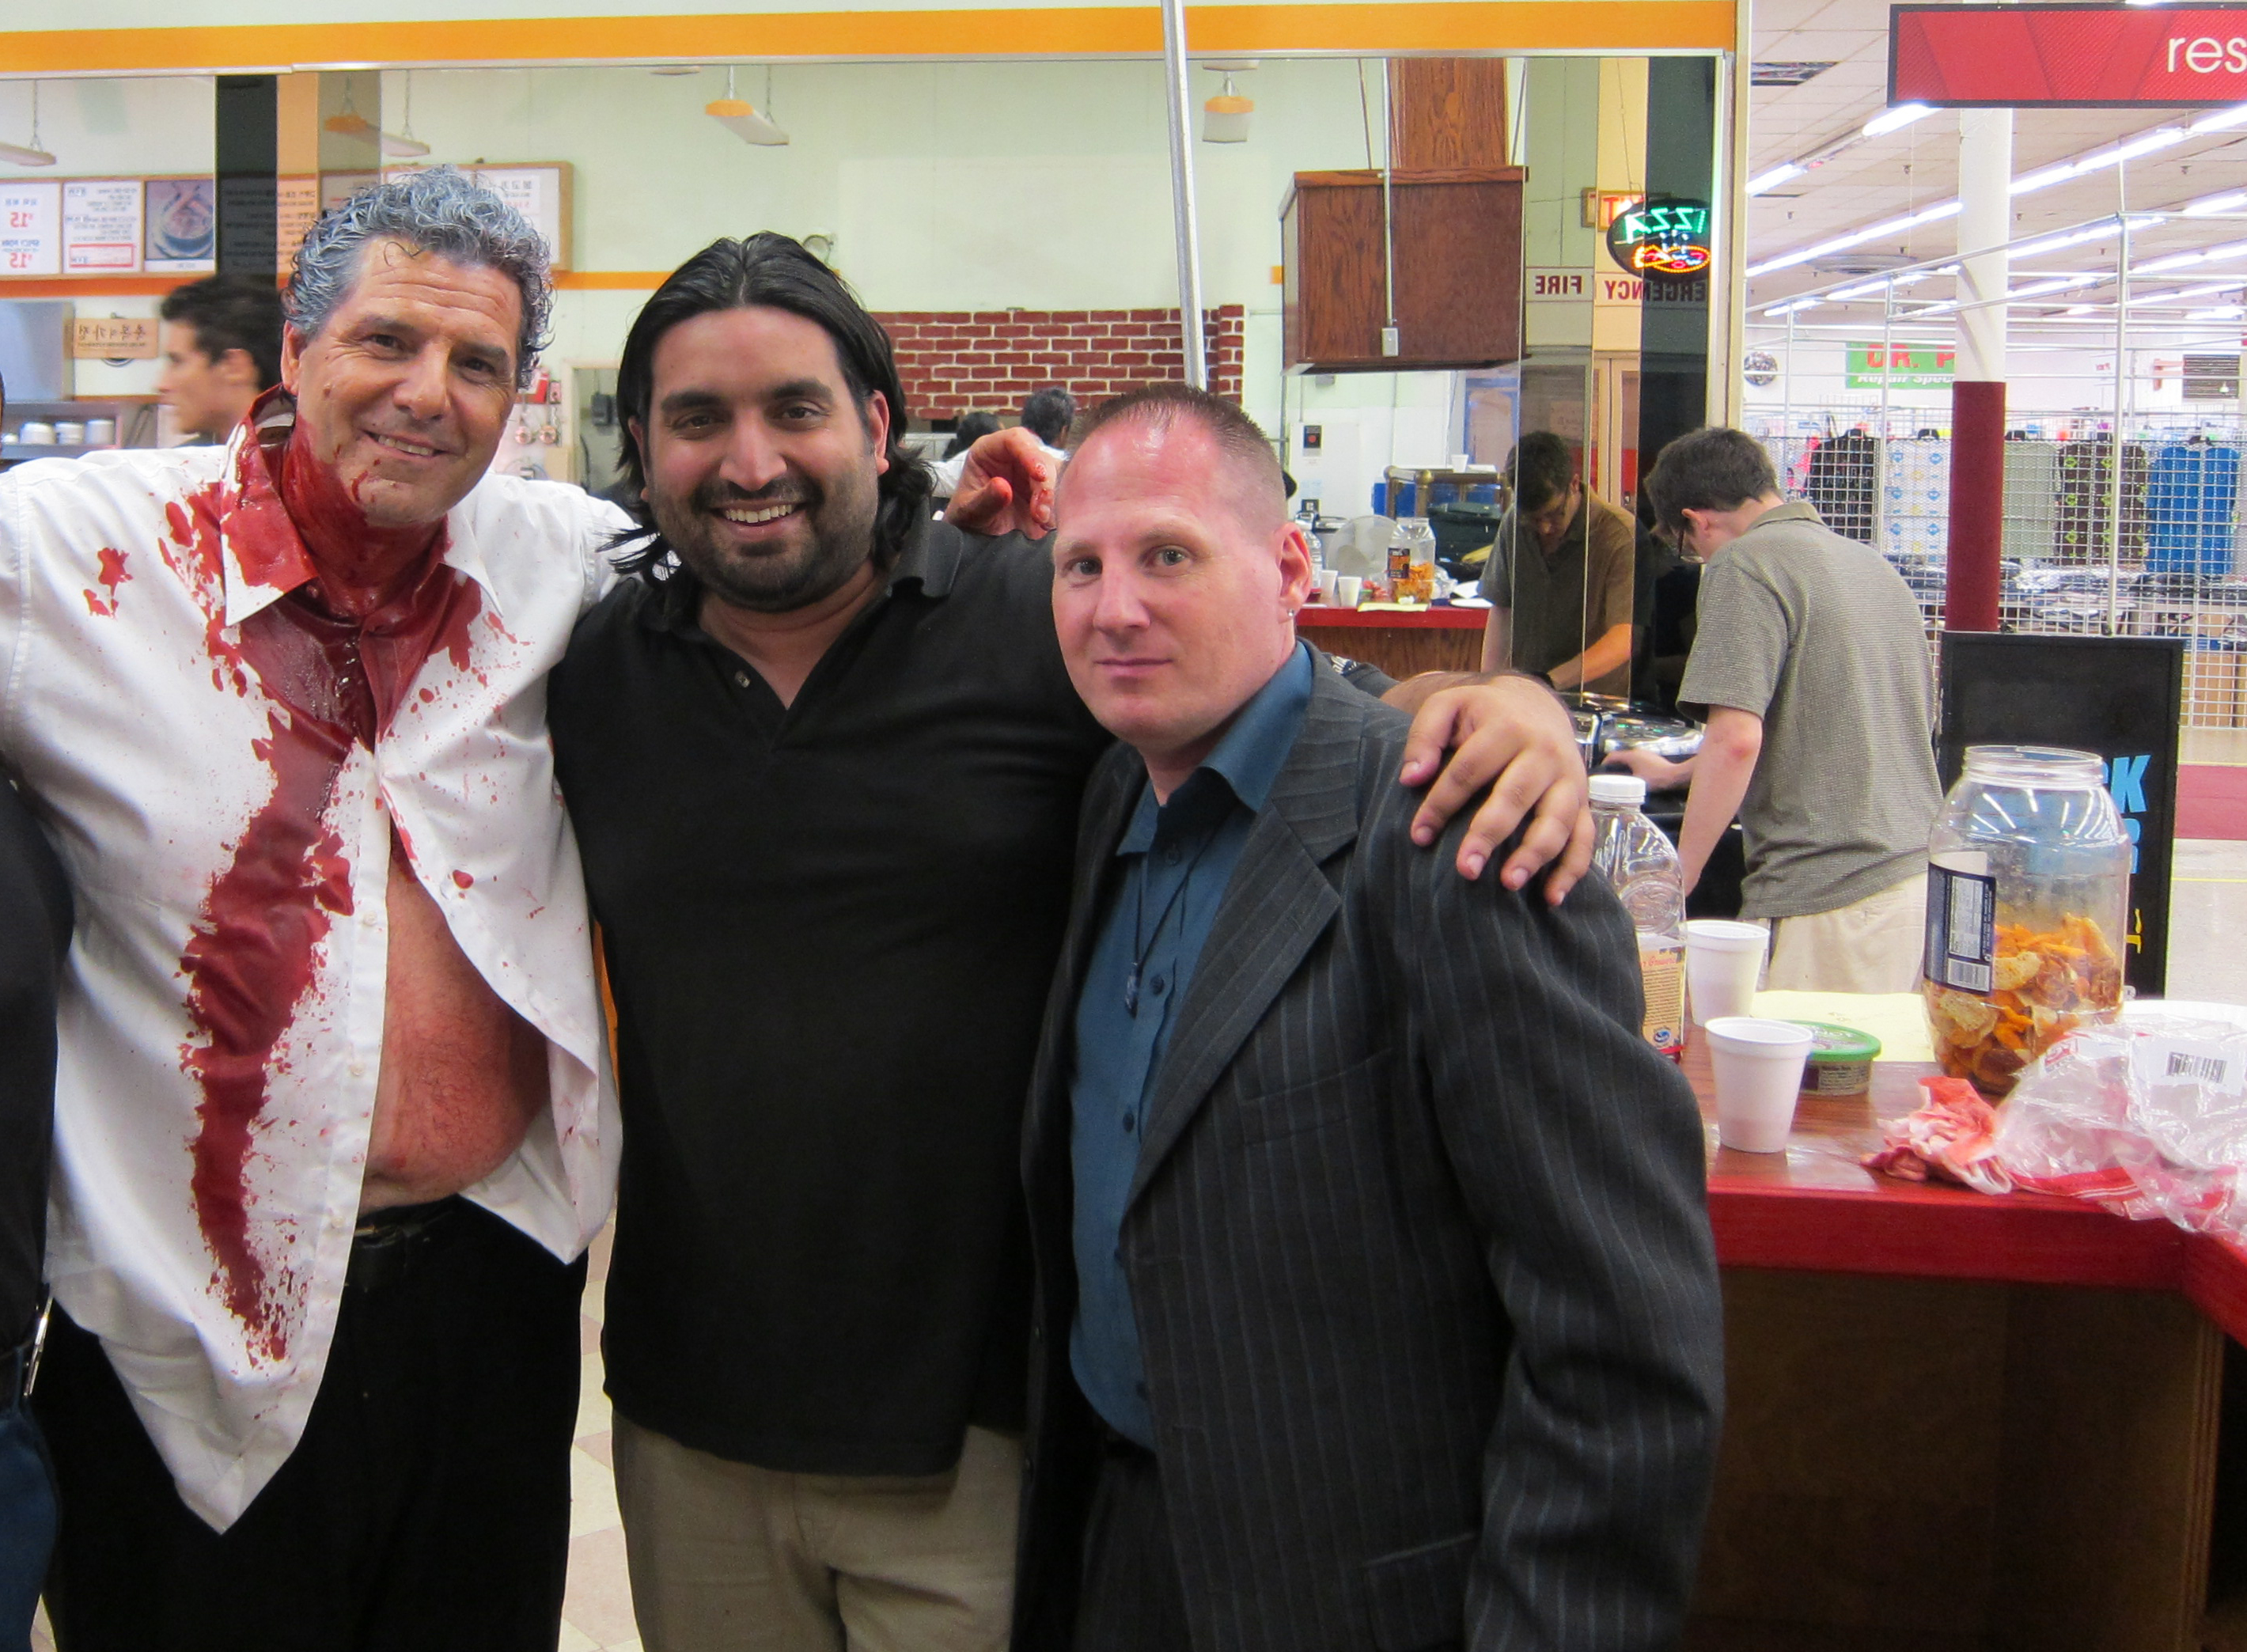 Ronnie Banerjee (DSK Unauthorized, Mafia Man: Robstown Gangster), John Thomas (New York City casting director) and Rich Rossi on the set of Night Bird